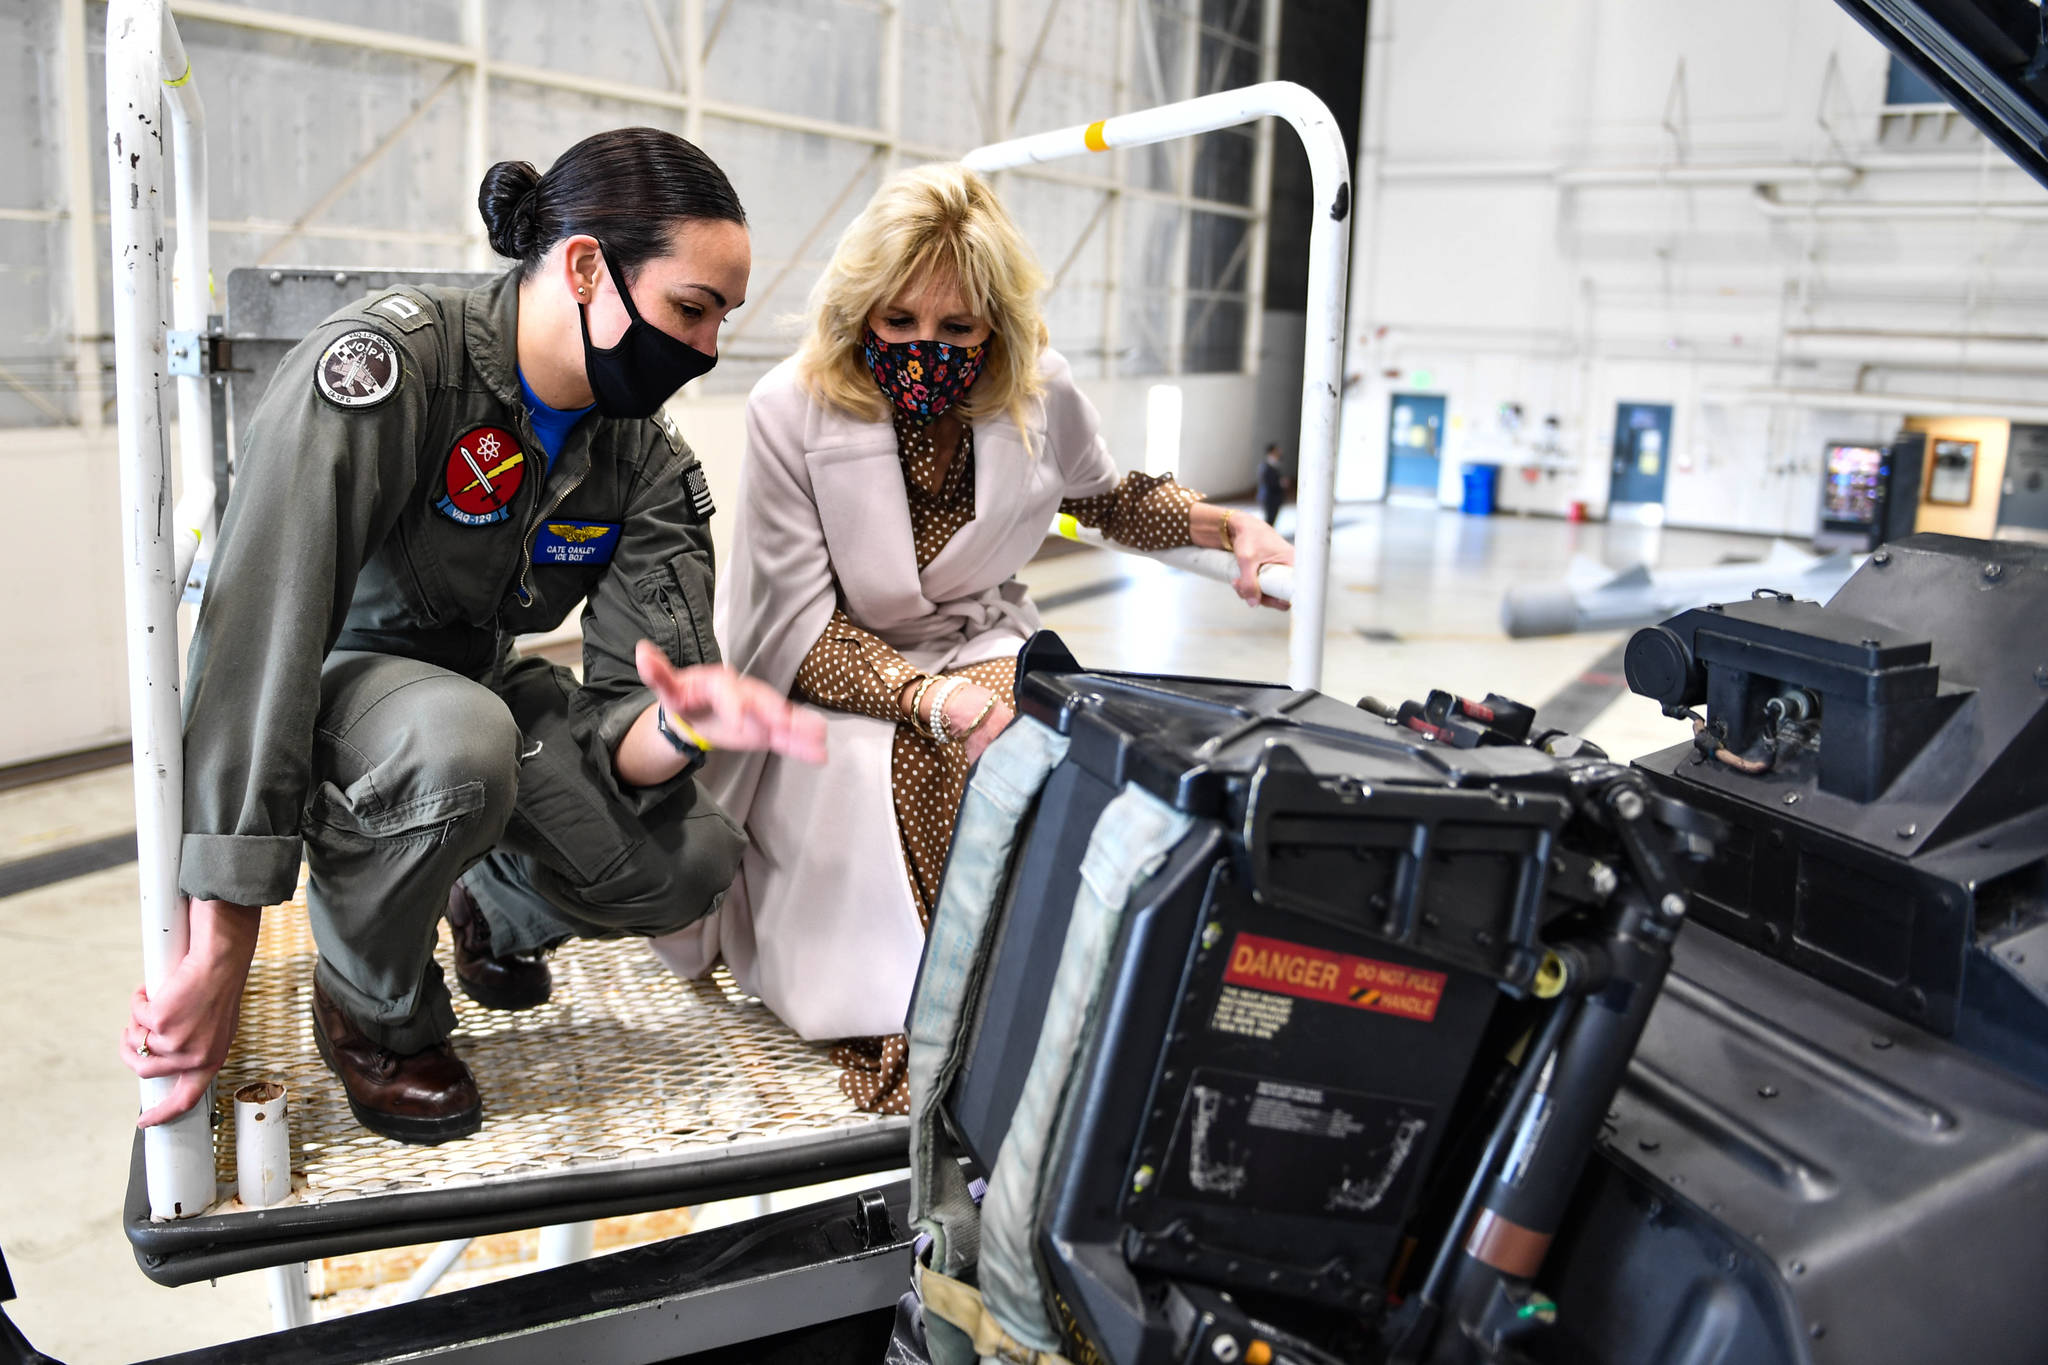 Photo by U.S. Navy Photo by Mass Communication Specialist 3rd Class Aranza Valdez
Lt. Cate Oakley shows an aircraft to First Lady Dr. Jill Biden at Naval Air Station Whidbey Island March 9, 2021. Dr. Biden visited the base to show support for military members and their families, and talk about the Joint Forces Initiative.